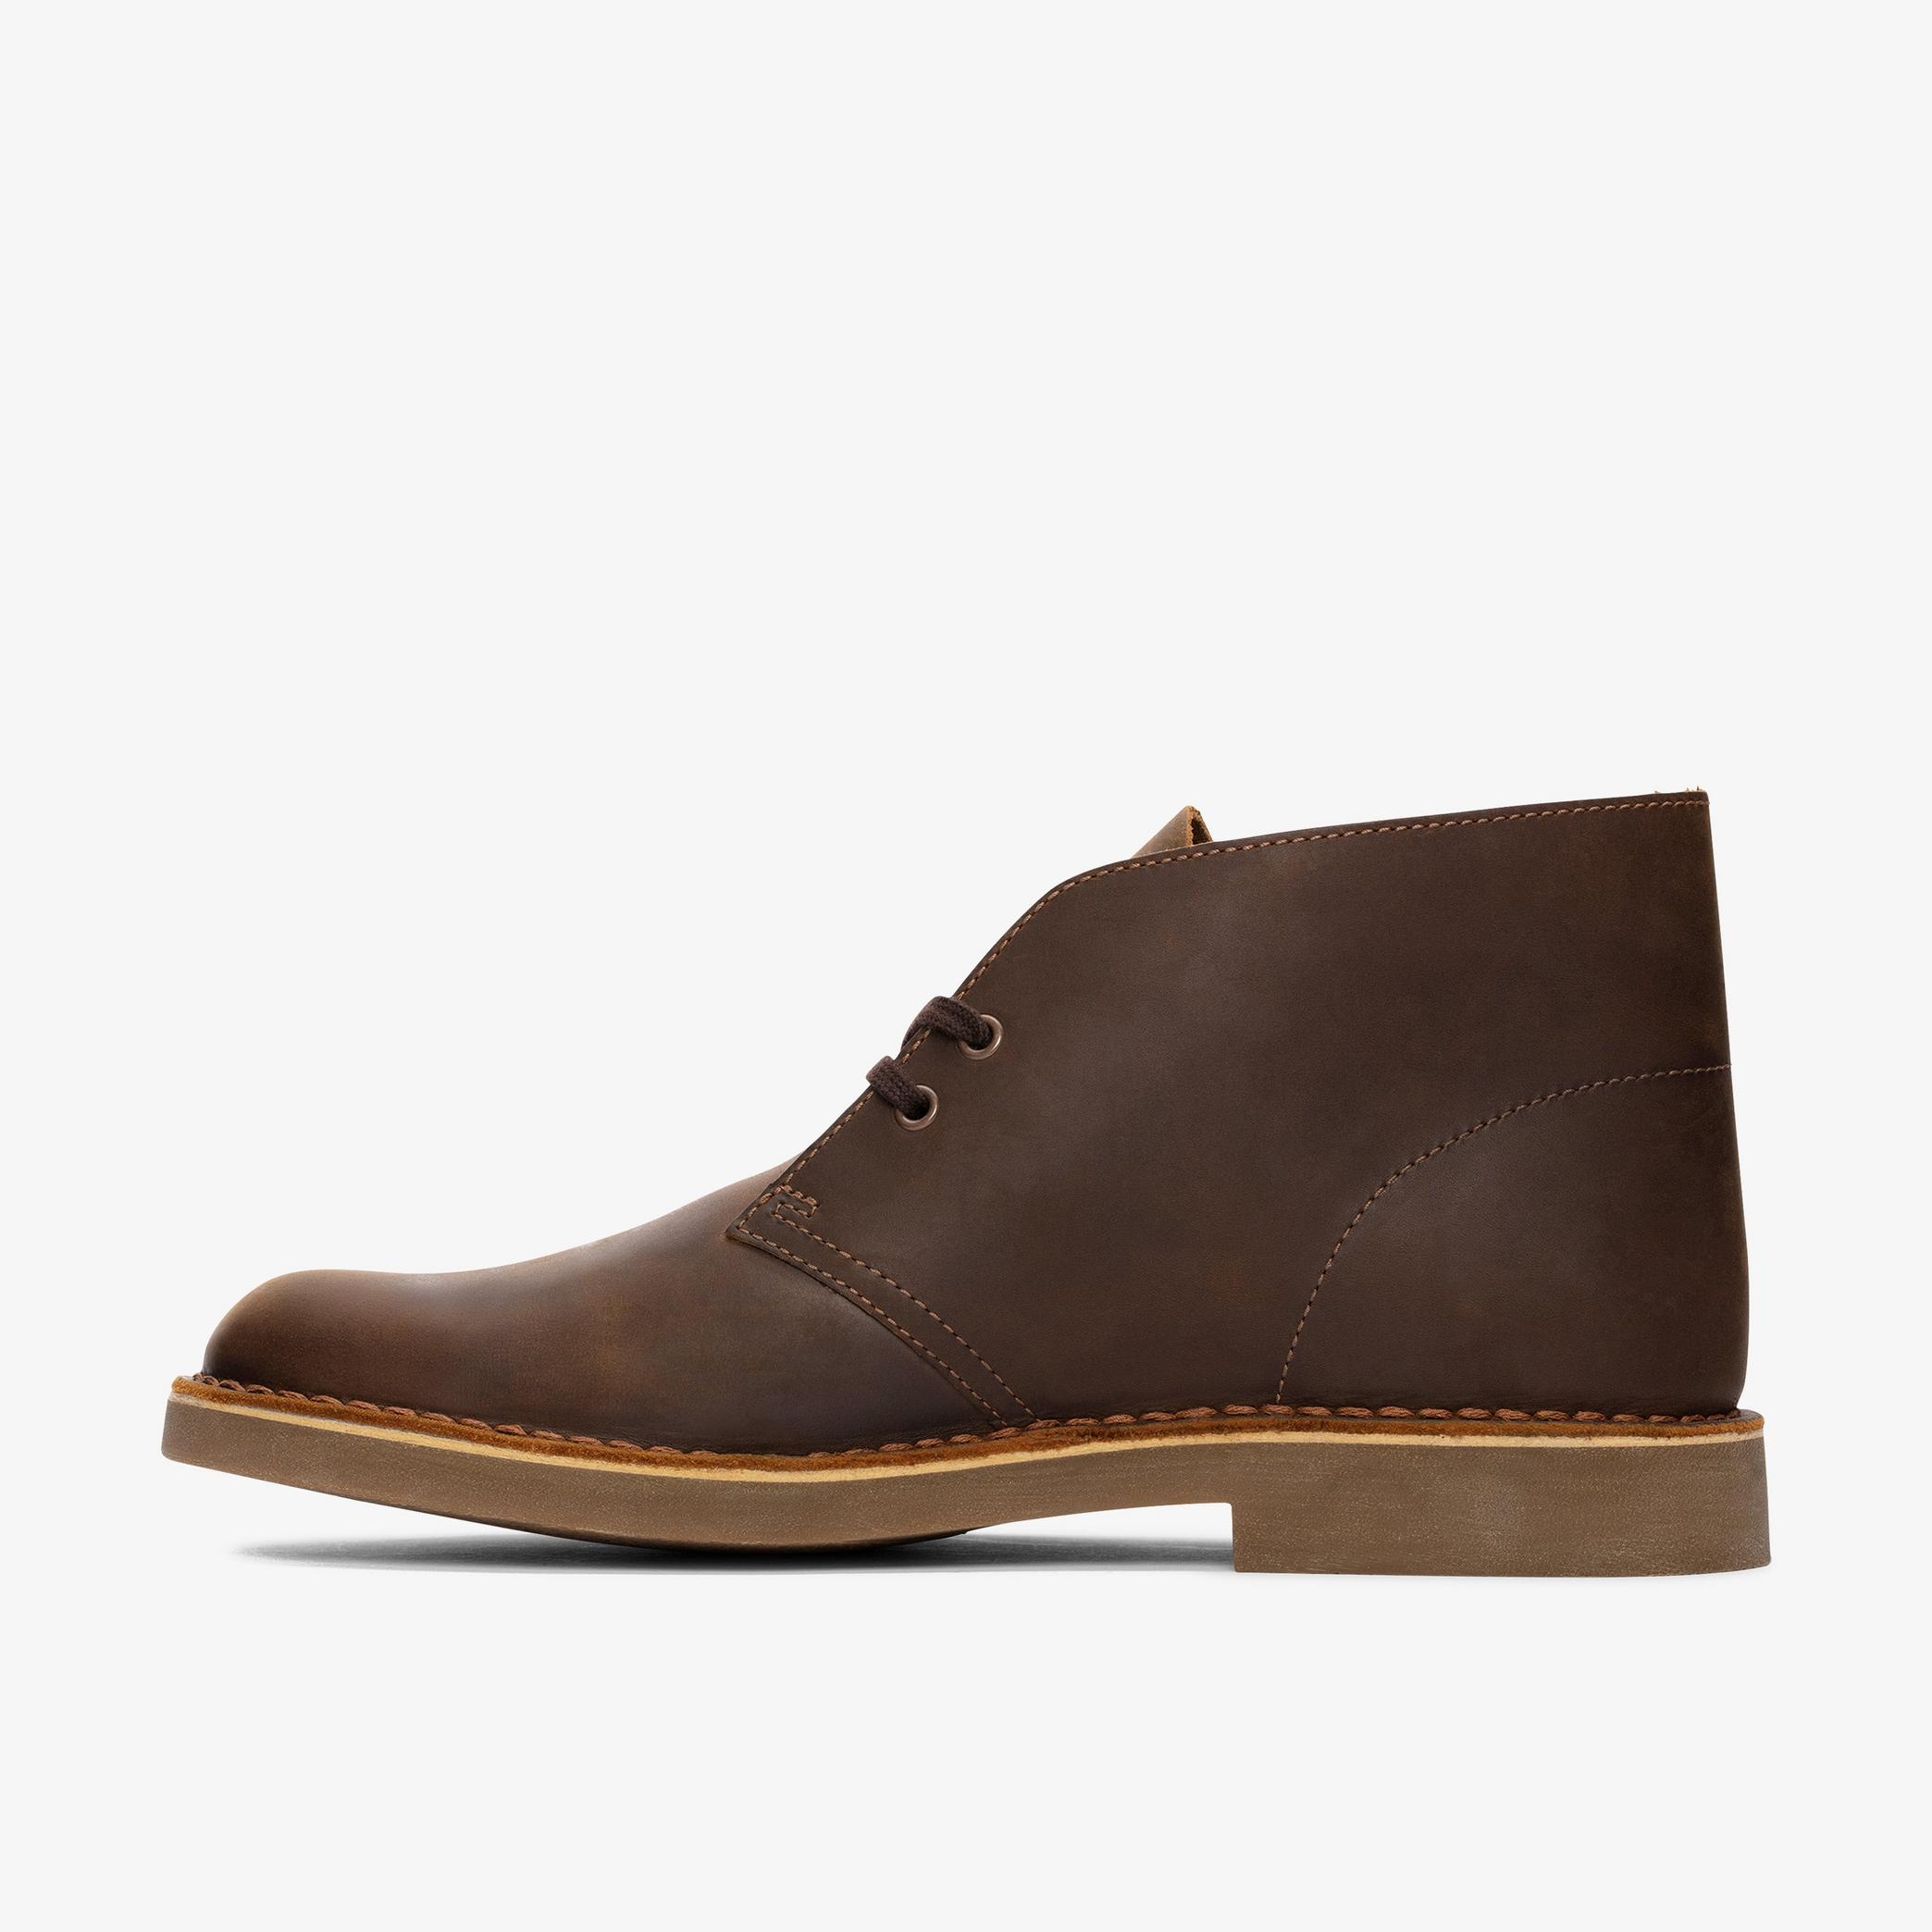 Desert Boot Evo Beeswax Leather Desert Boots, view 3 of 8